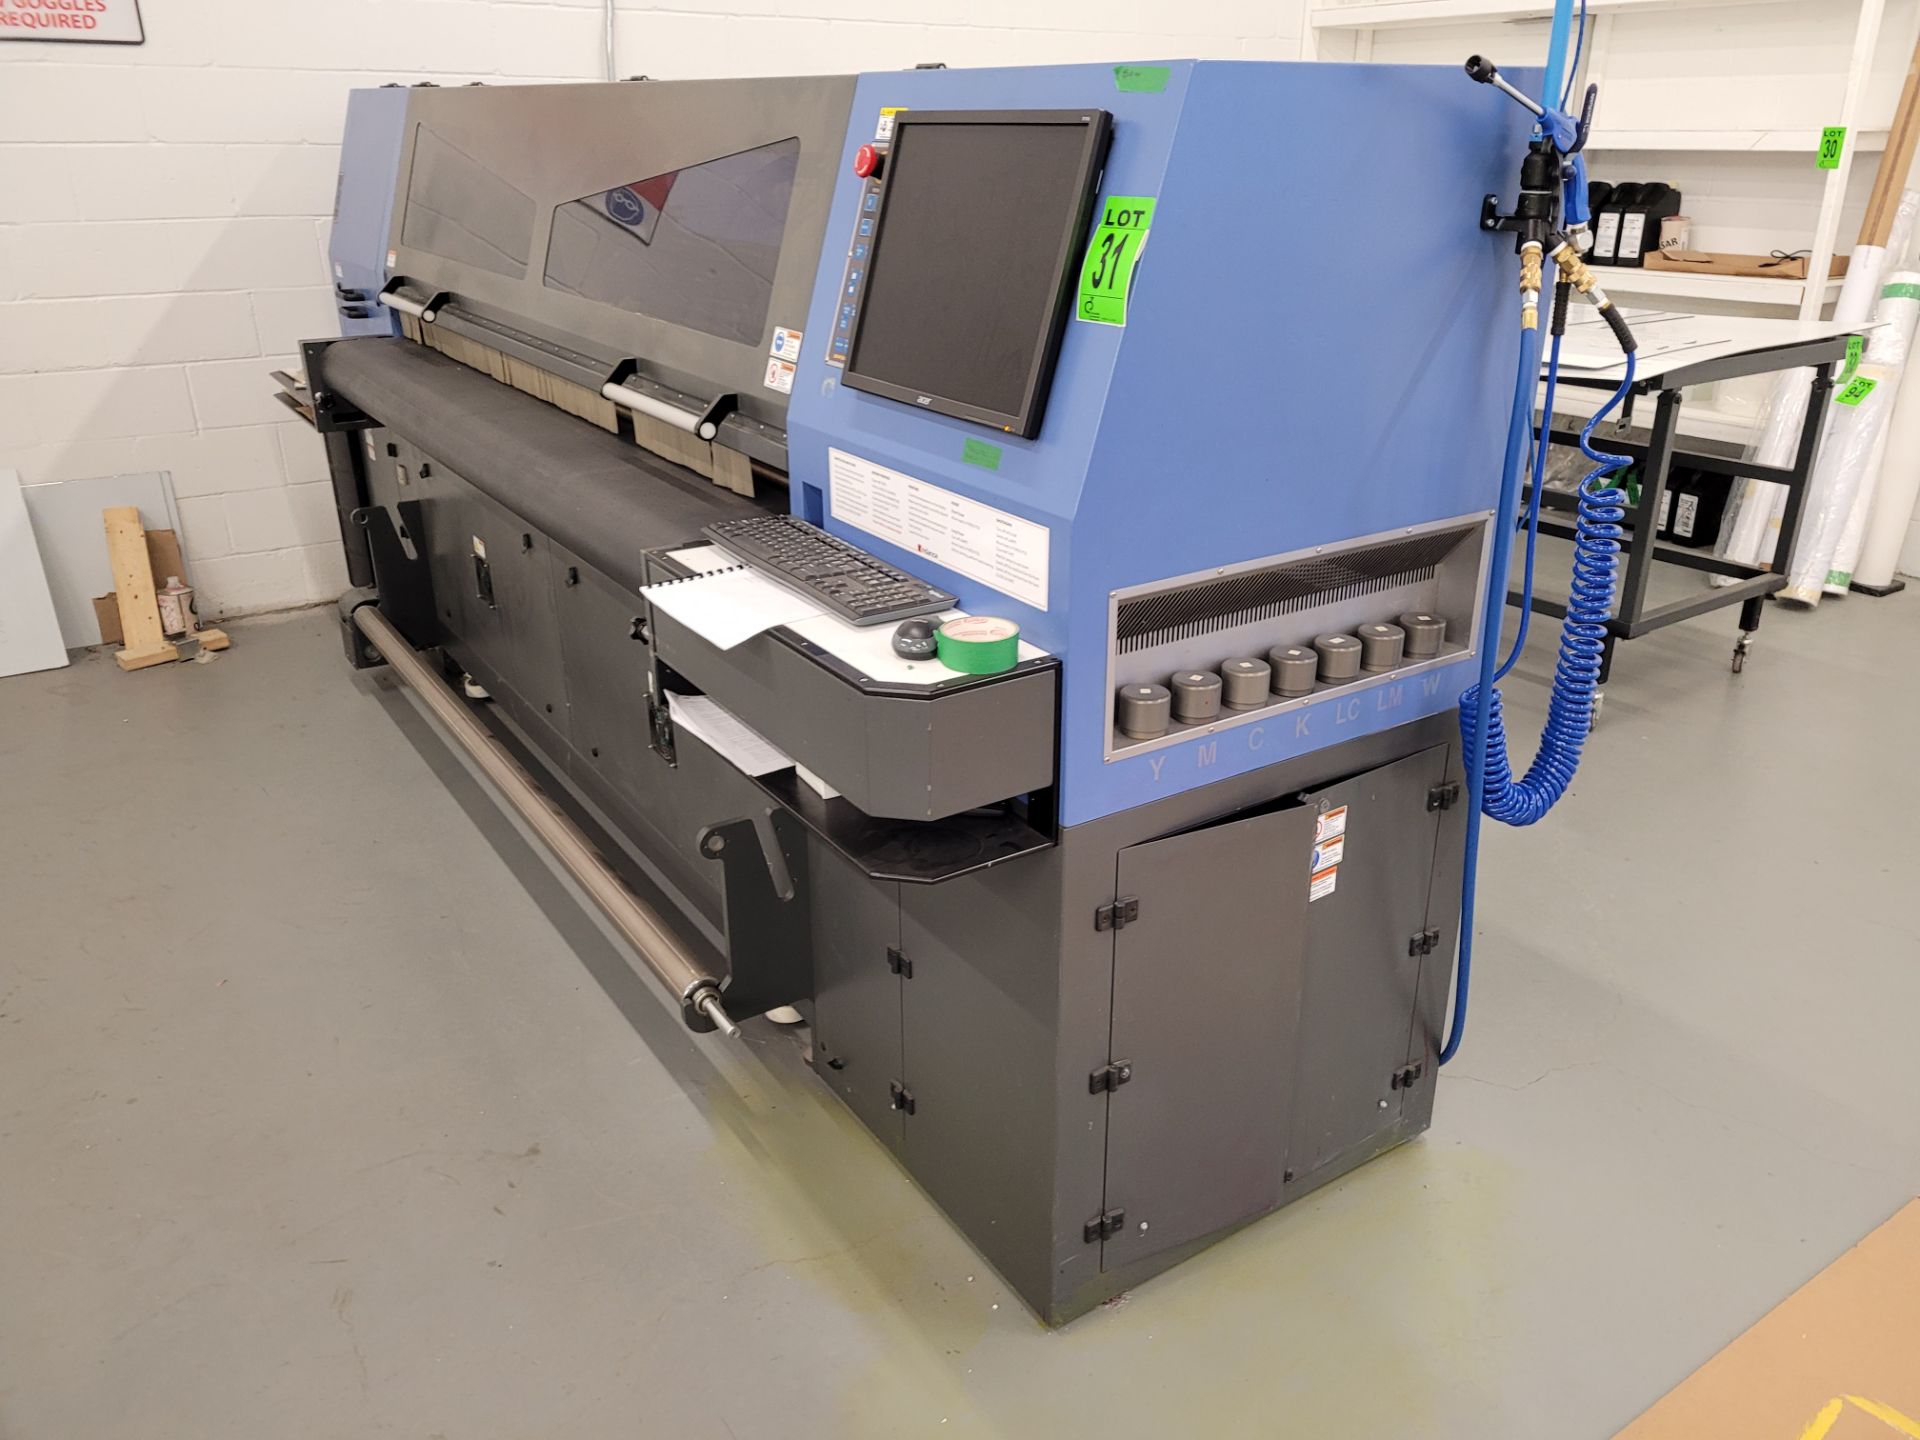 DYSS UV Printing Machine mod. Lasco & Apollo, ser. 221674RR000100264, 220V, includes conveyors and - Image 3 of 37